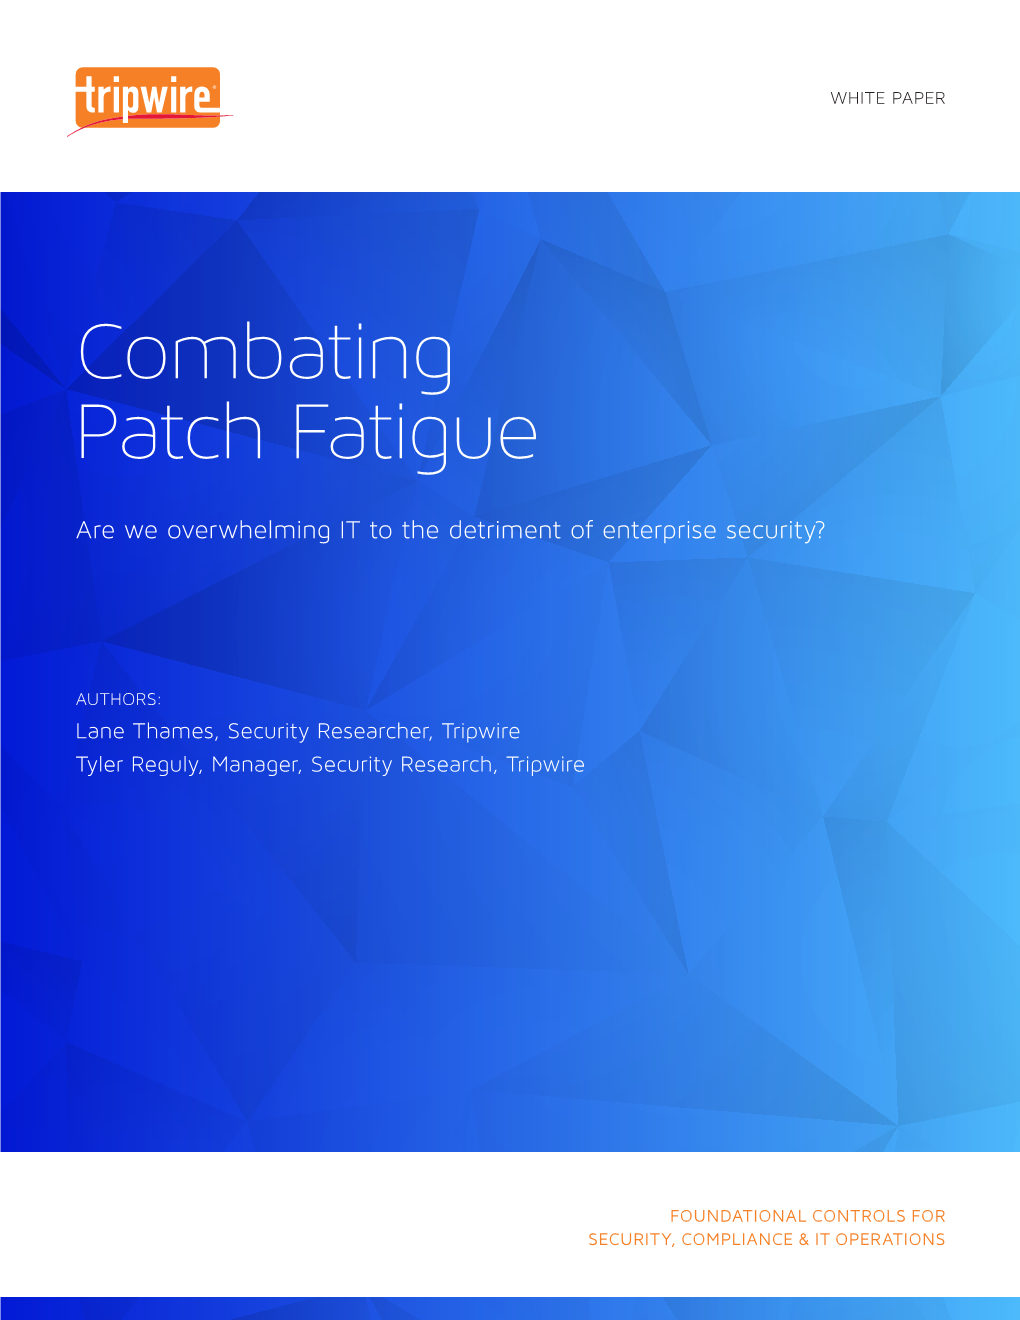 Combating Patch Fatigue